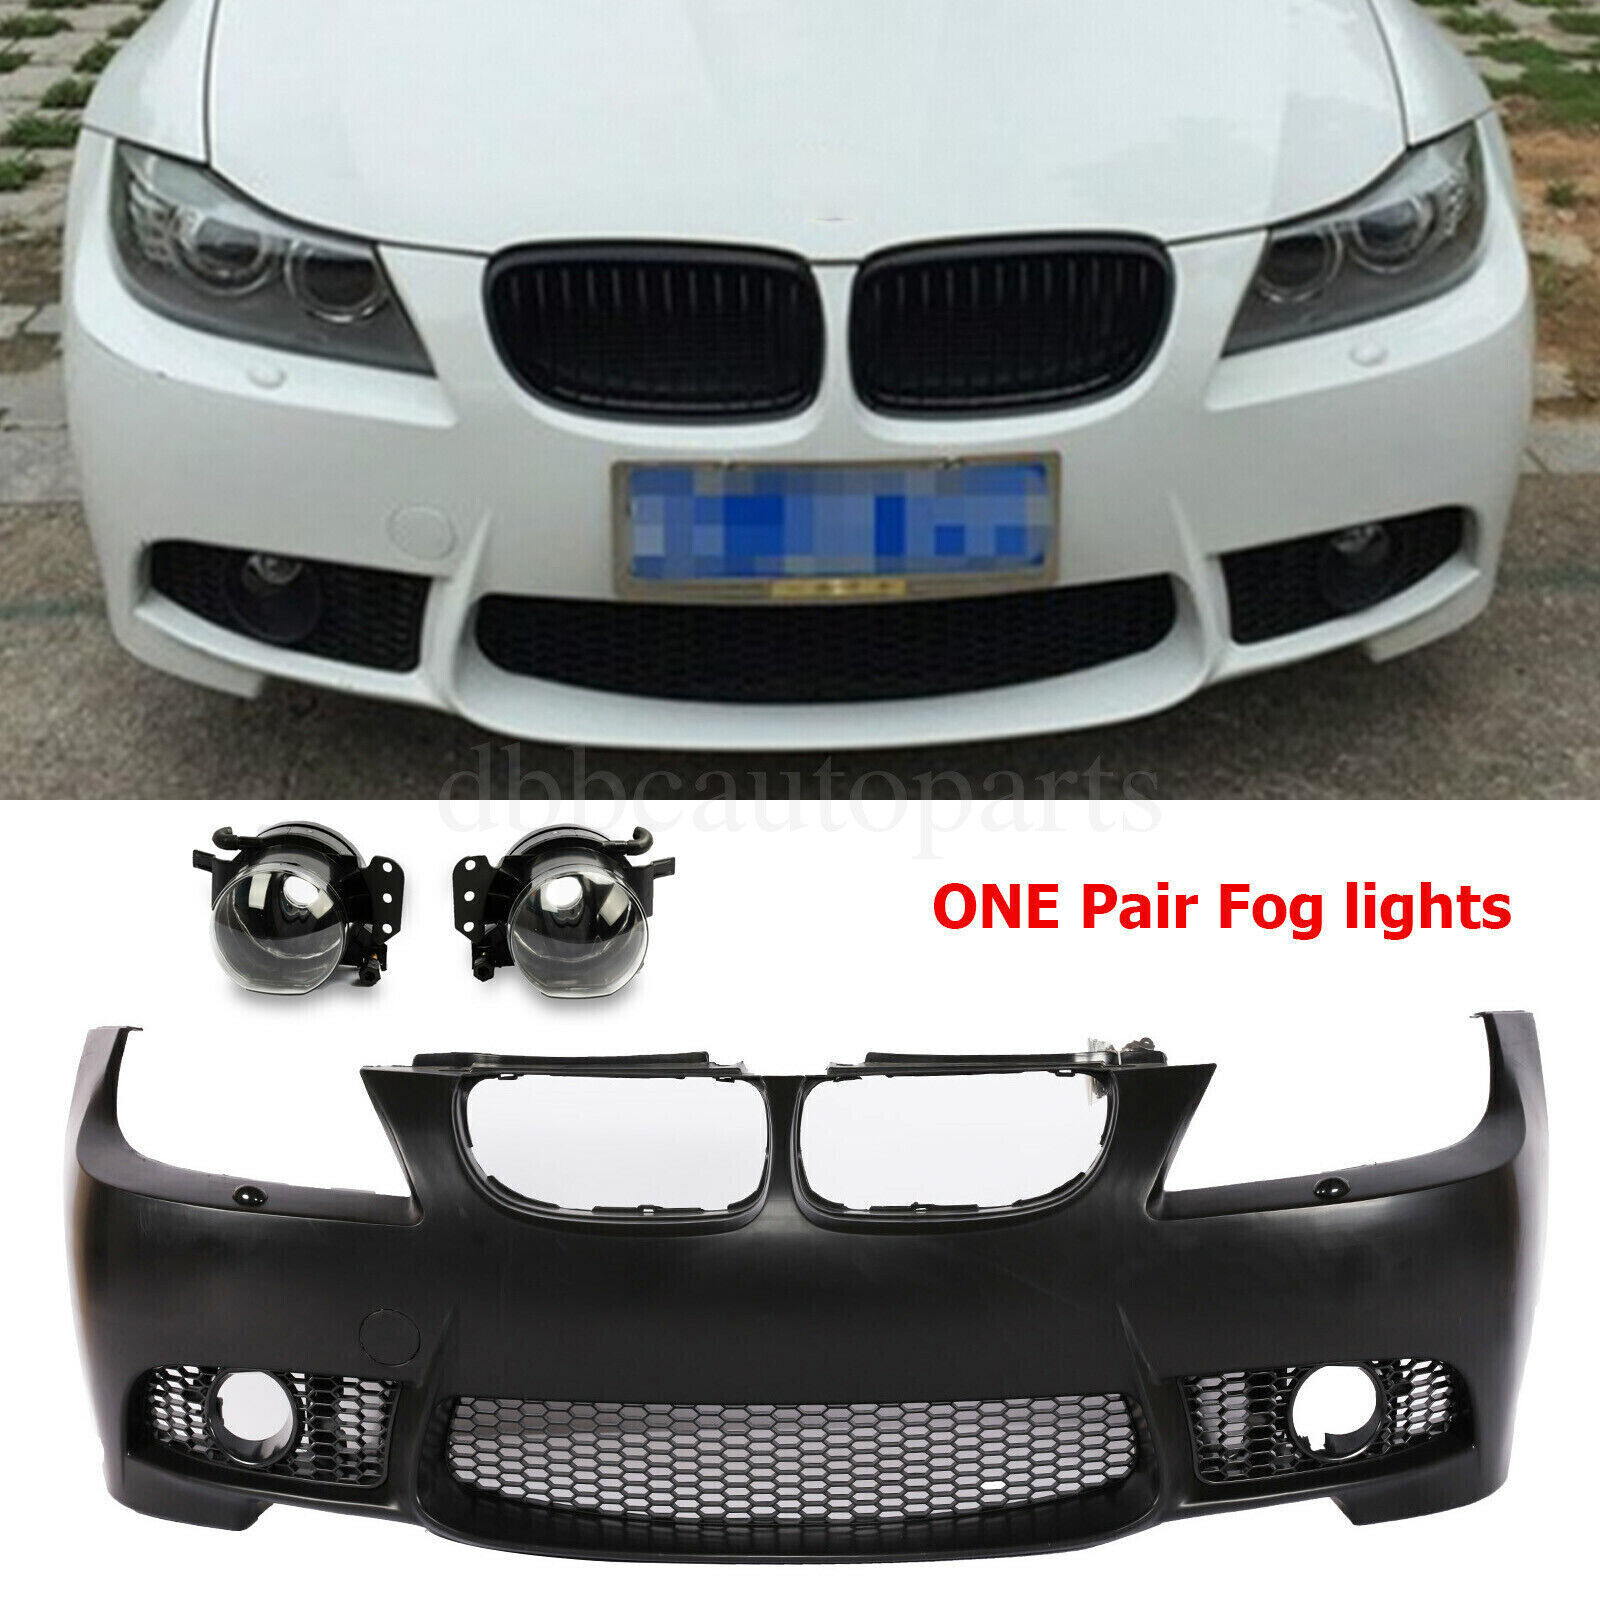 Front Bumper M3 Style  Fit for 2009-2011 BMW E90 E91 4dr 3-Series + Fog lights